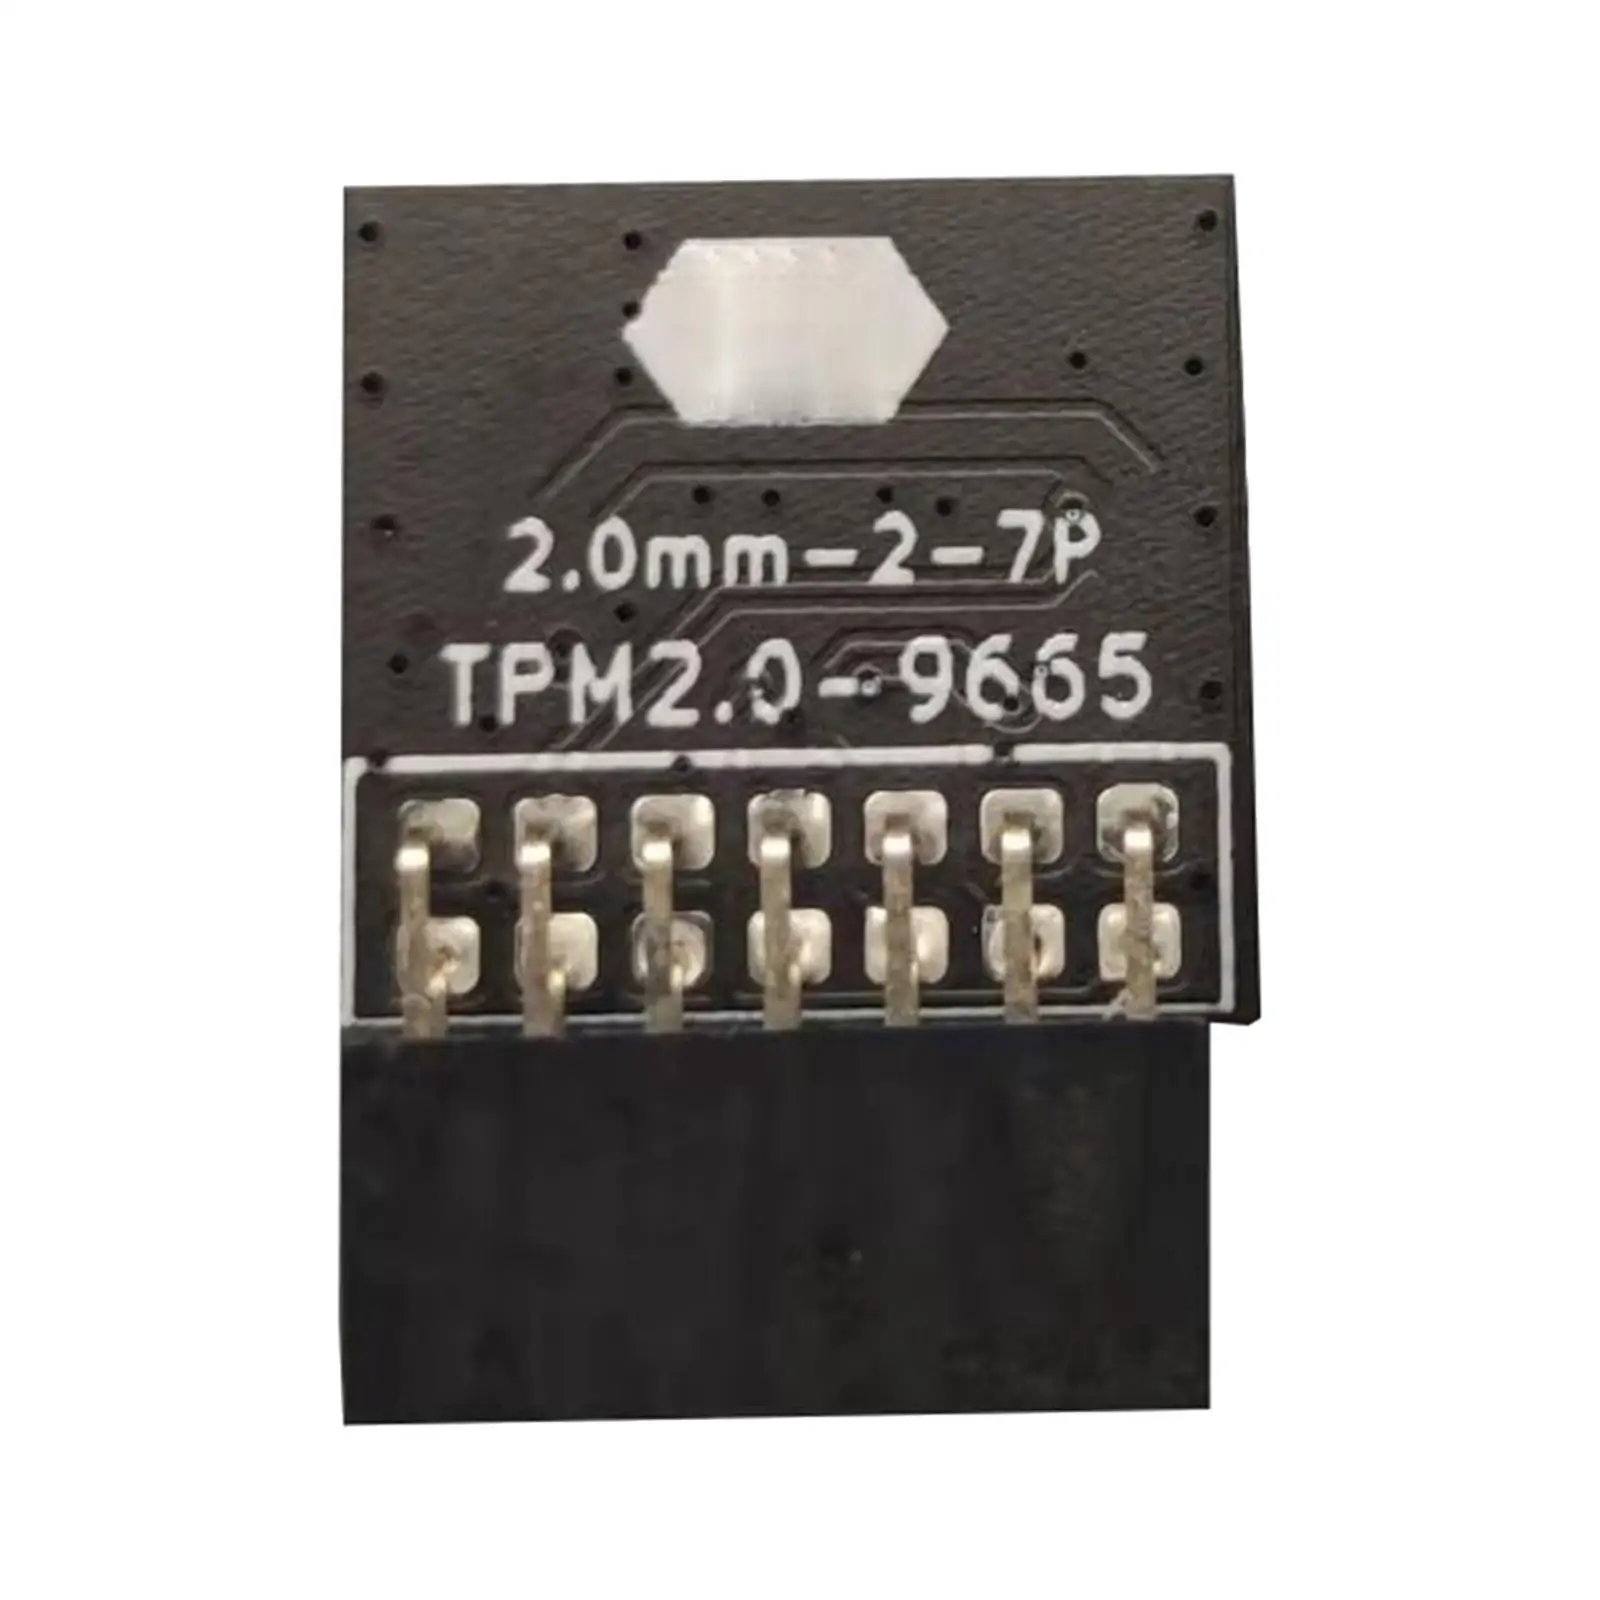 Lpc Tpm 2.0 Module Board Encryption Cryptographic Processor Metal Remote Card for Gigabyte for ASUS for Windows 11 for MSI